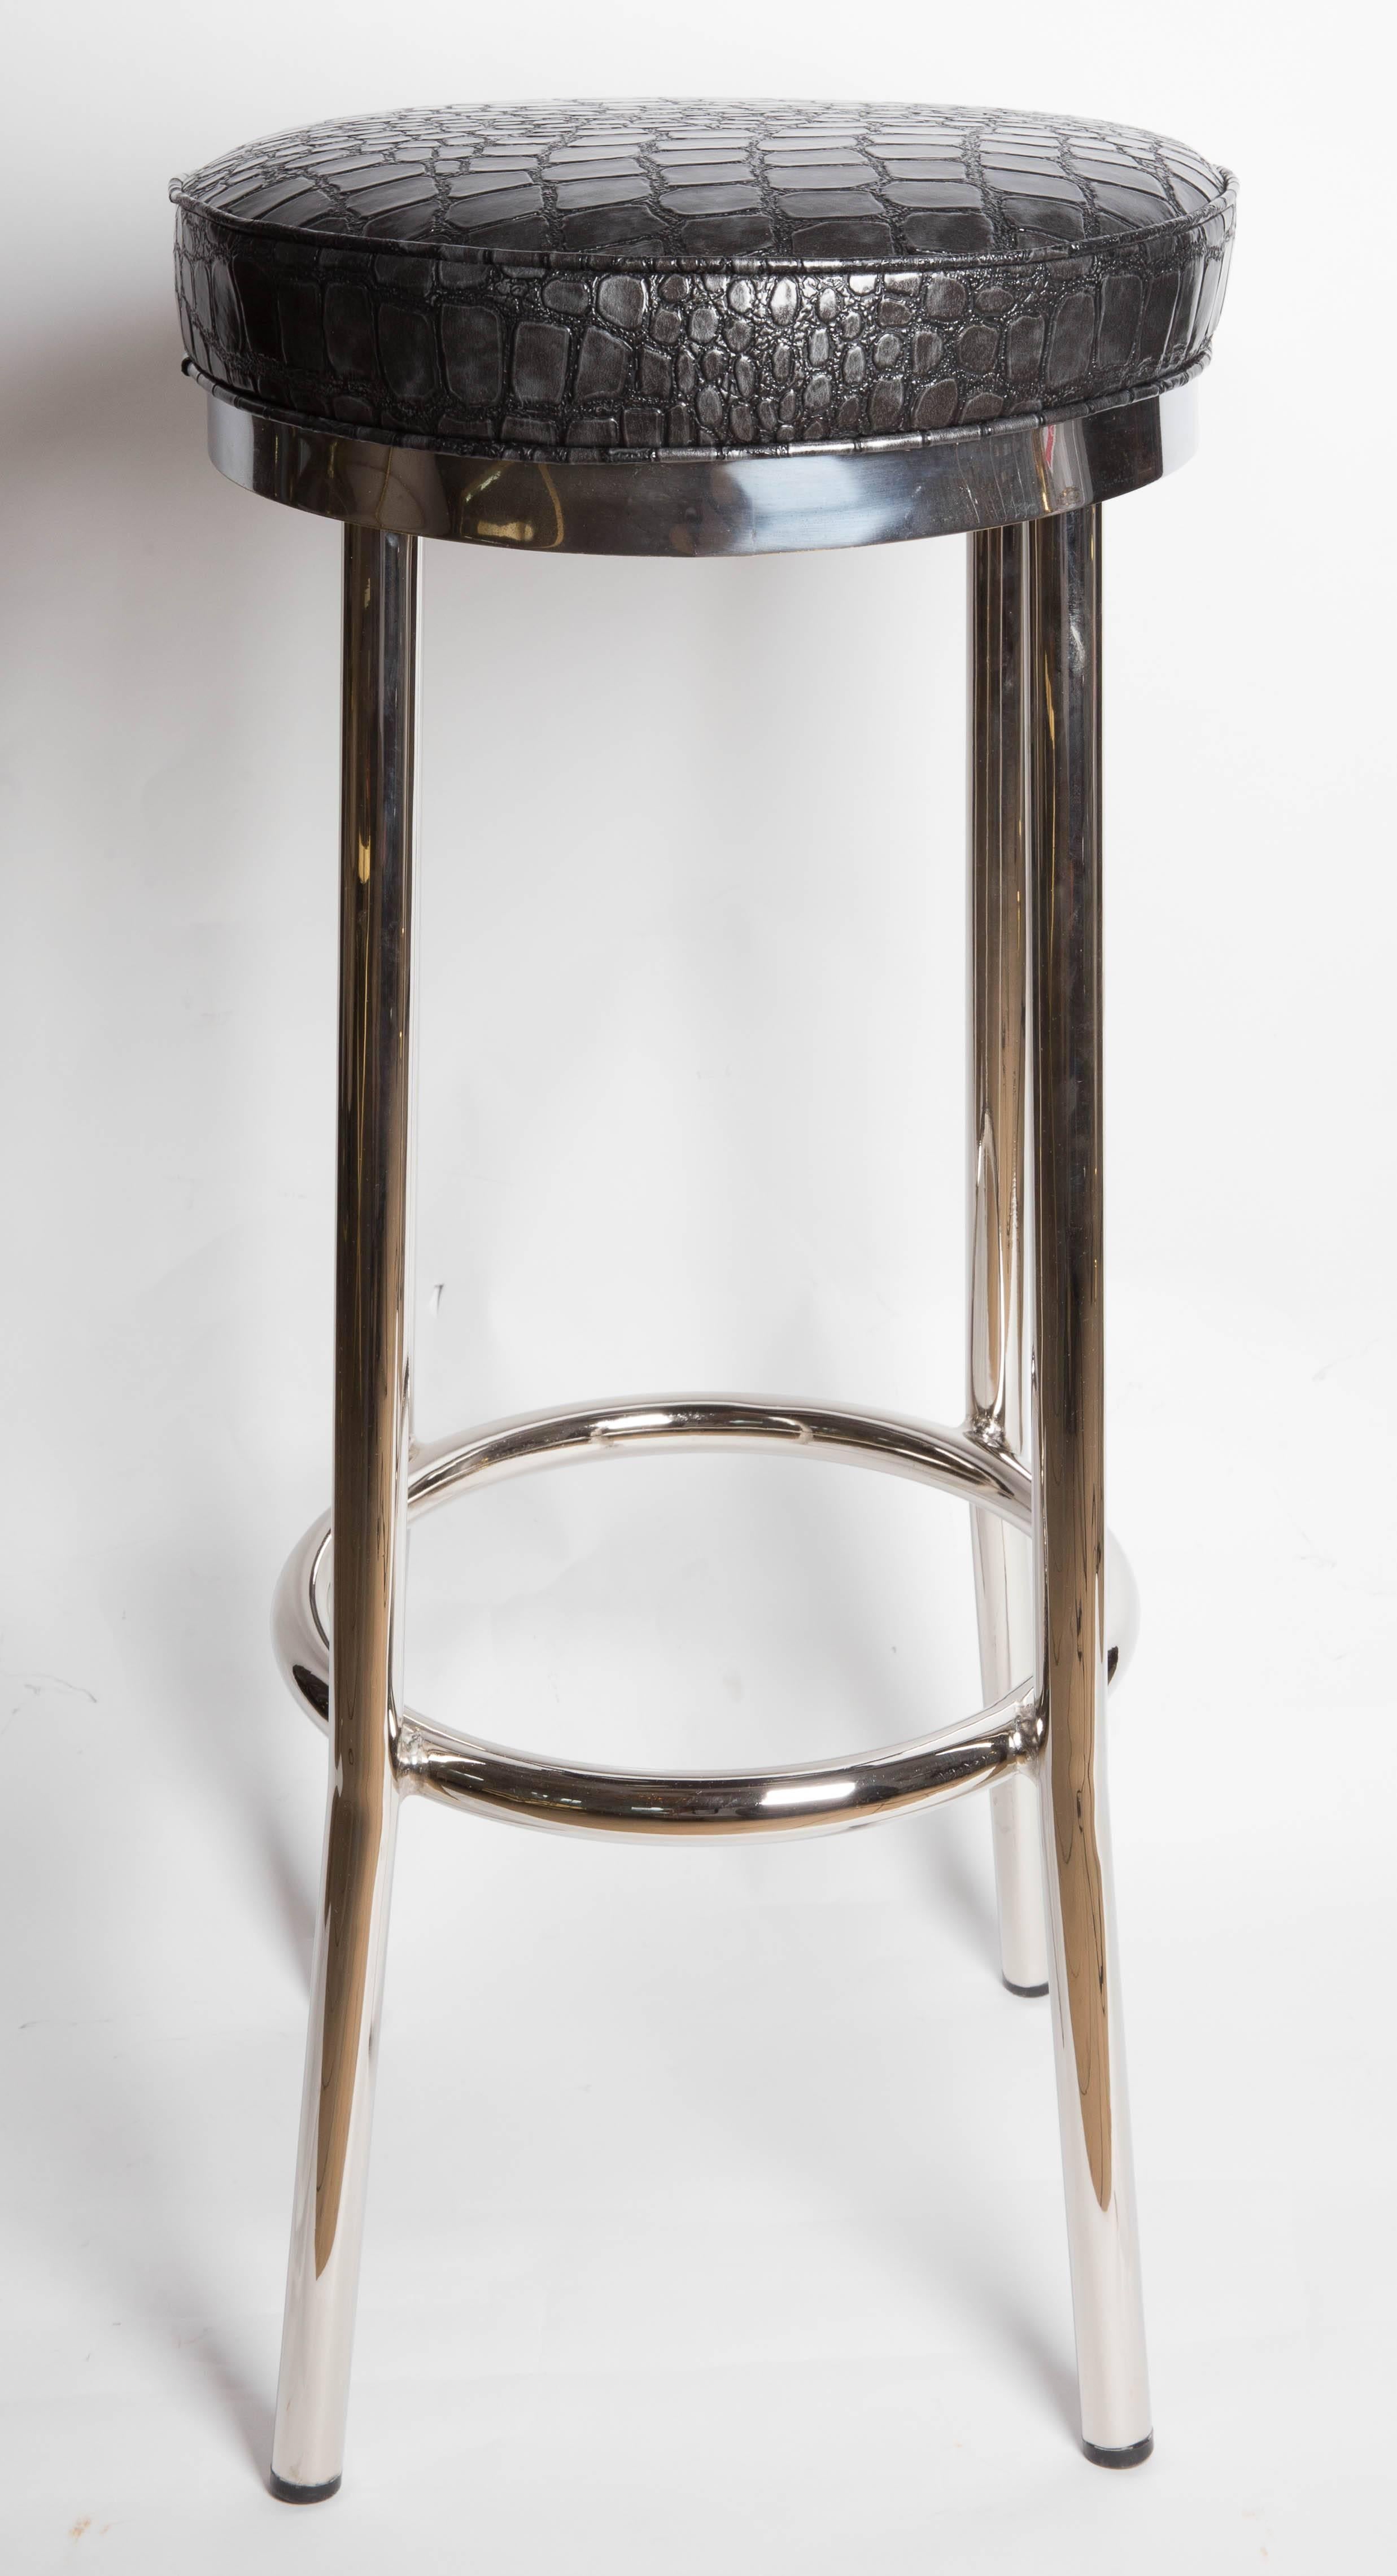 20th Century Set of Four Chrome Bar Stools Upholstered in Black and Grey Faux Crock